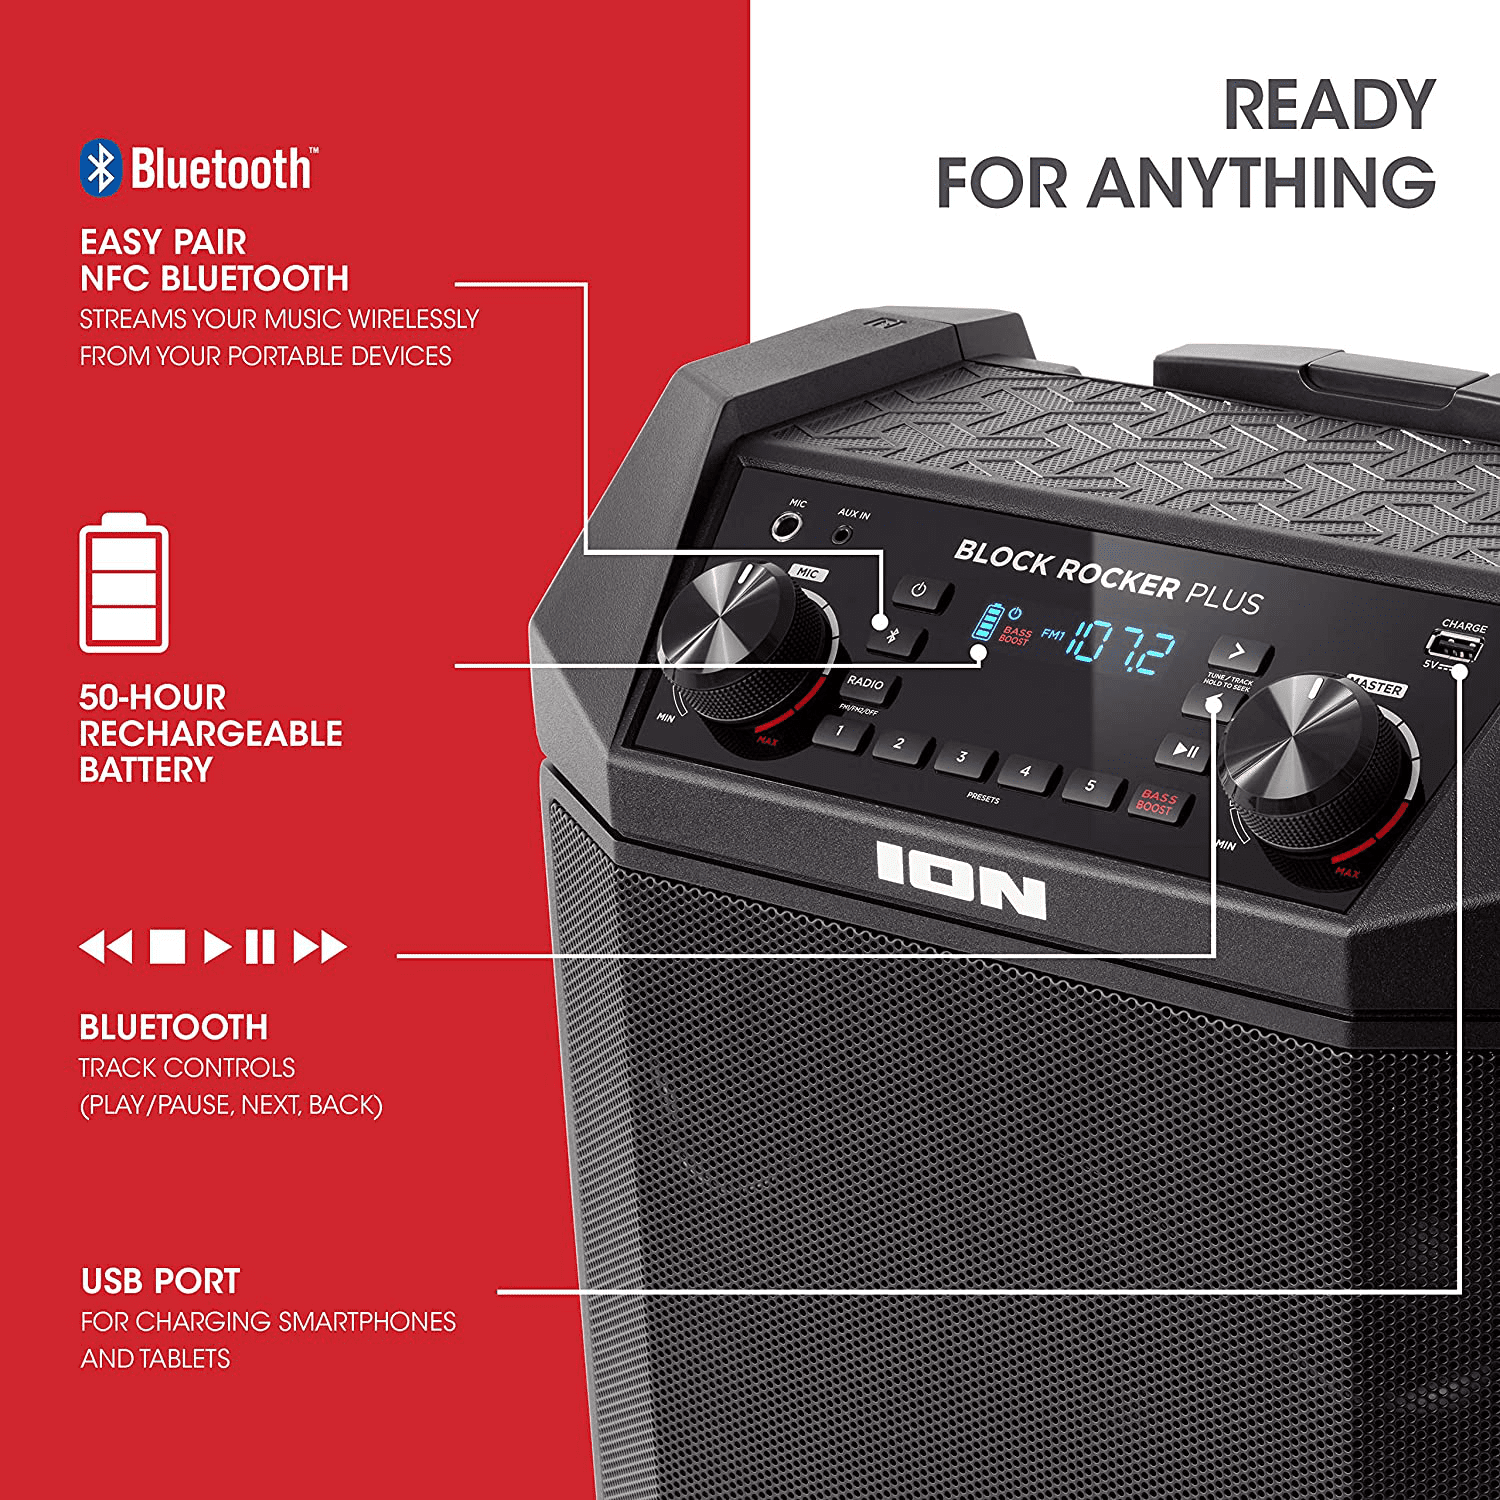 AM/FM Radio Ion Audio Block Rocker Plus Microphone and Cable Battery Powered with Bluetooth Connectivity 100W Portable Speaker Renewed Wheels and Telescopic Handle and USB Charging 